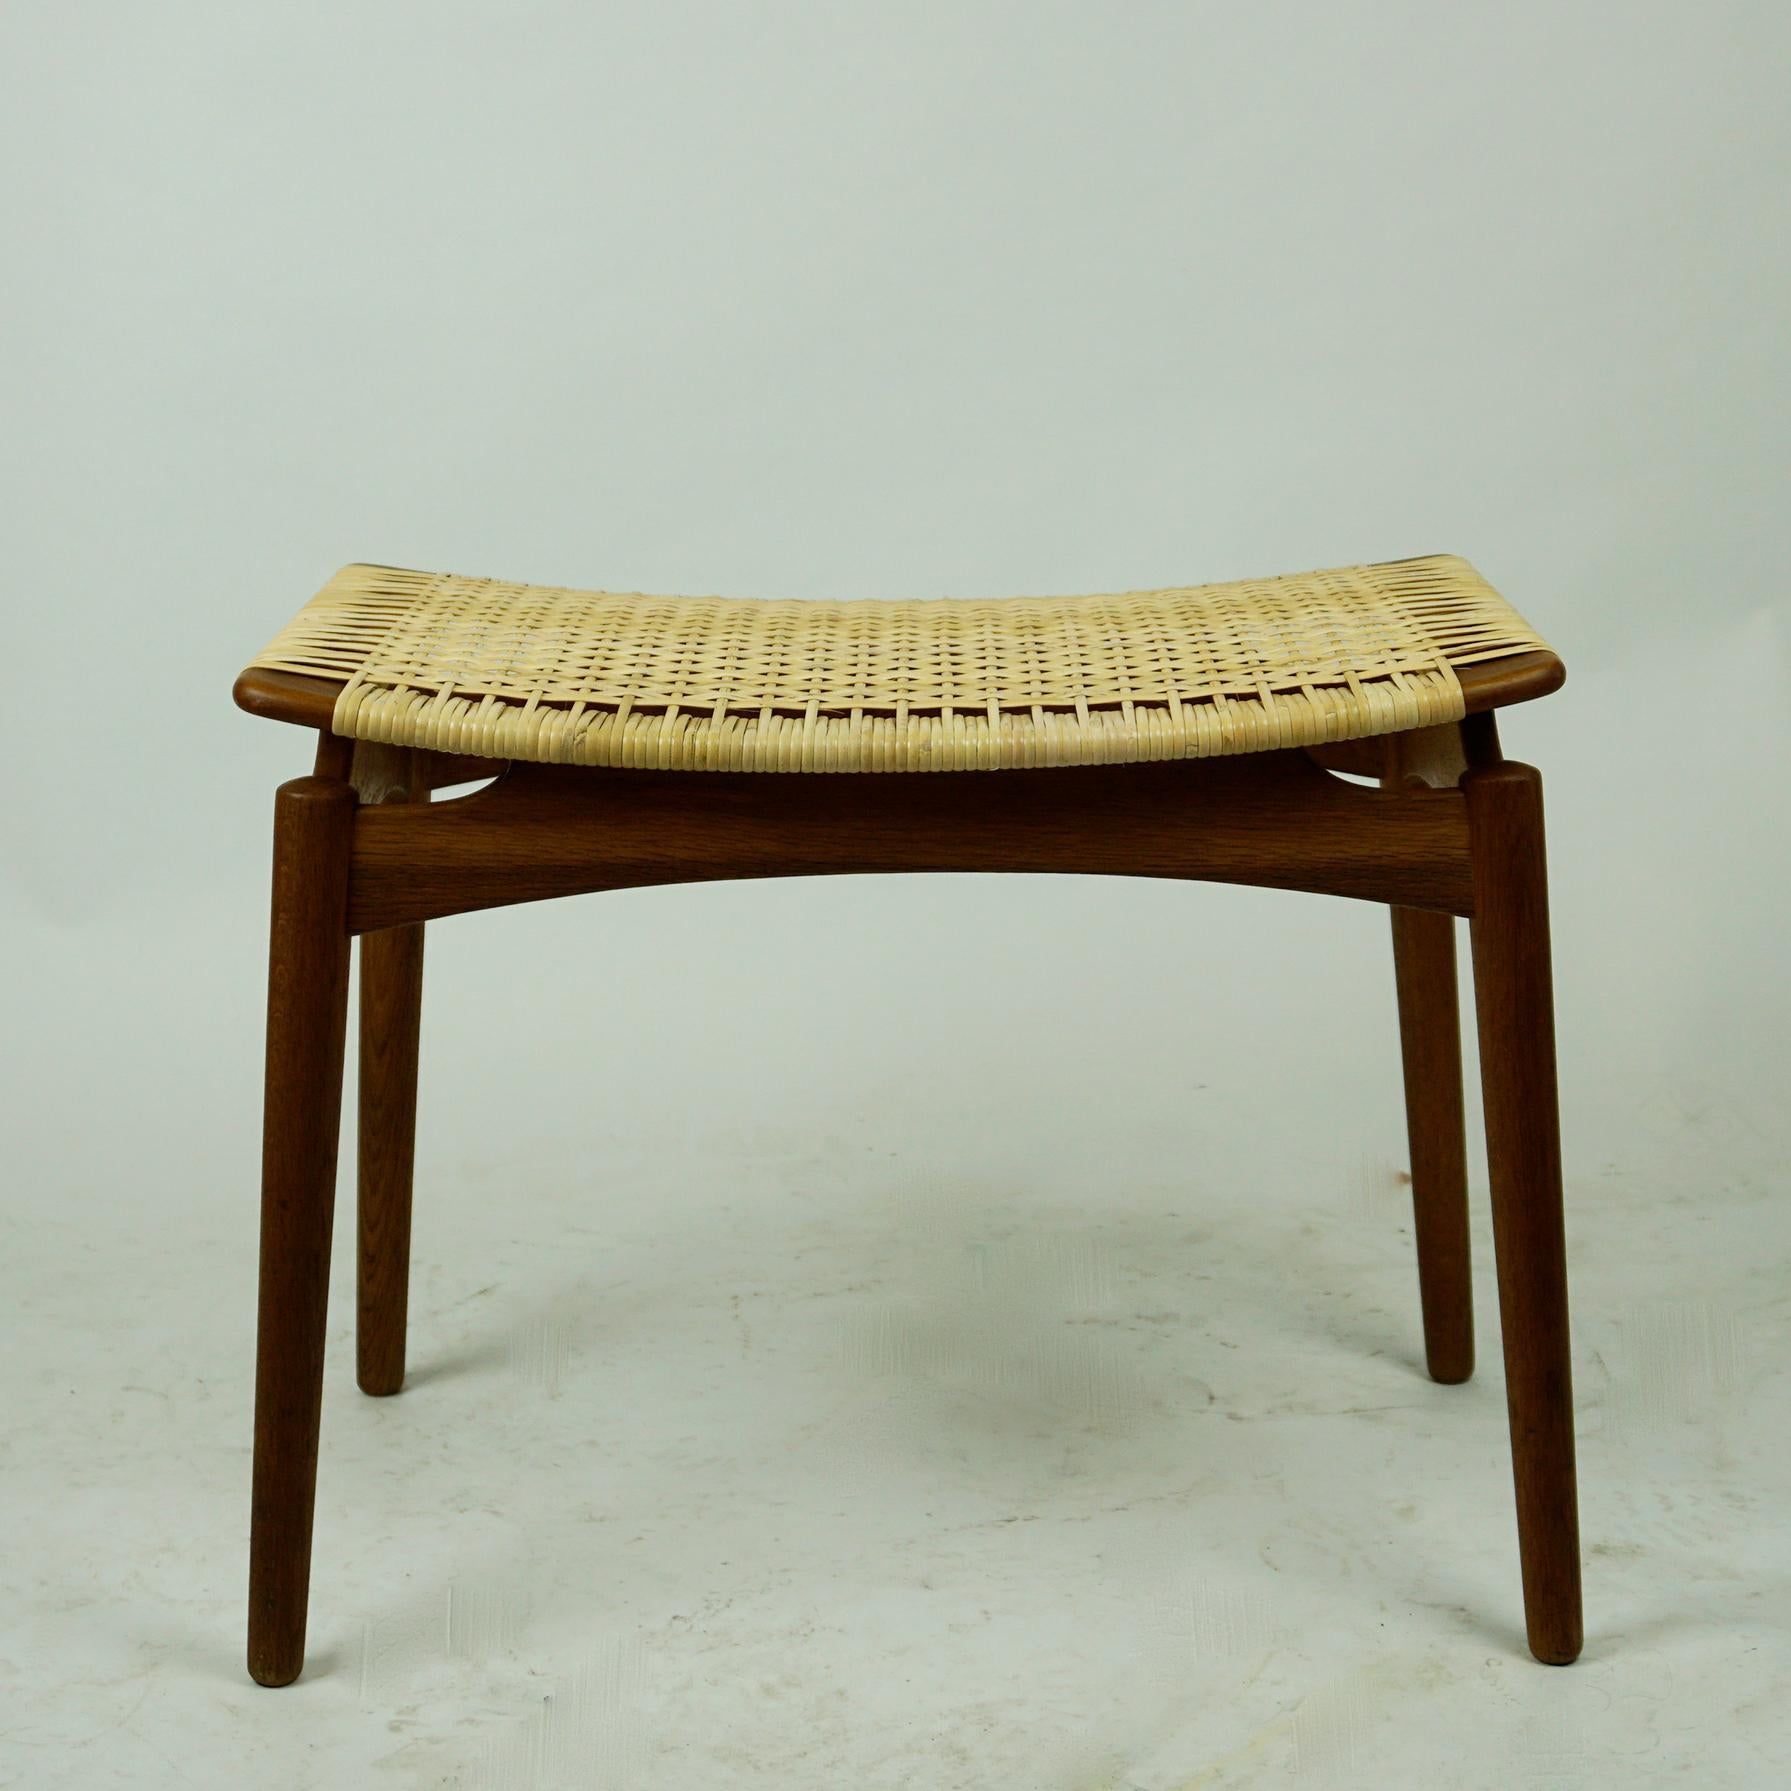 This stunning midcentury stool with teak legs and new woven cane seat has been produced by Olholm Mobelfabrik Denmark in the 1950s.
It´s floating seat has been fully restored with slender thin strips of cane woven around. 
Lifted from the main legs